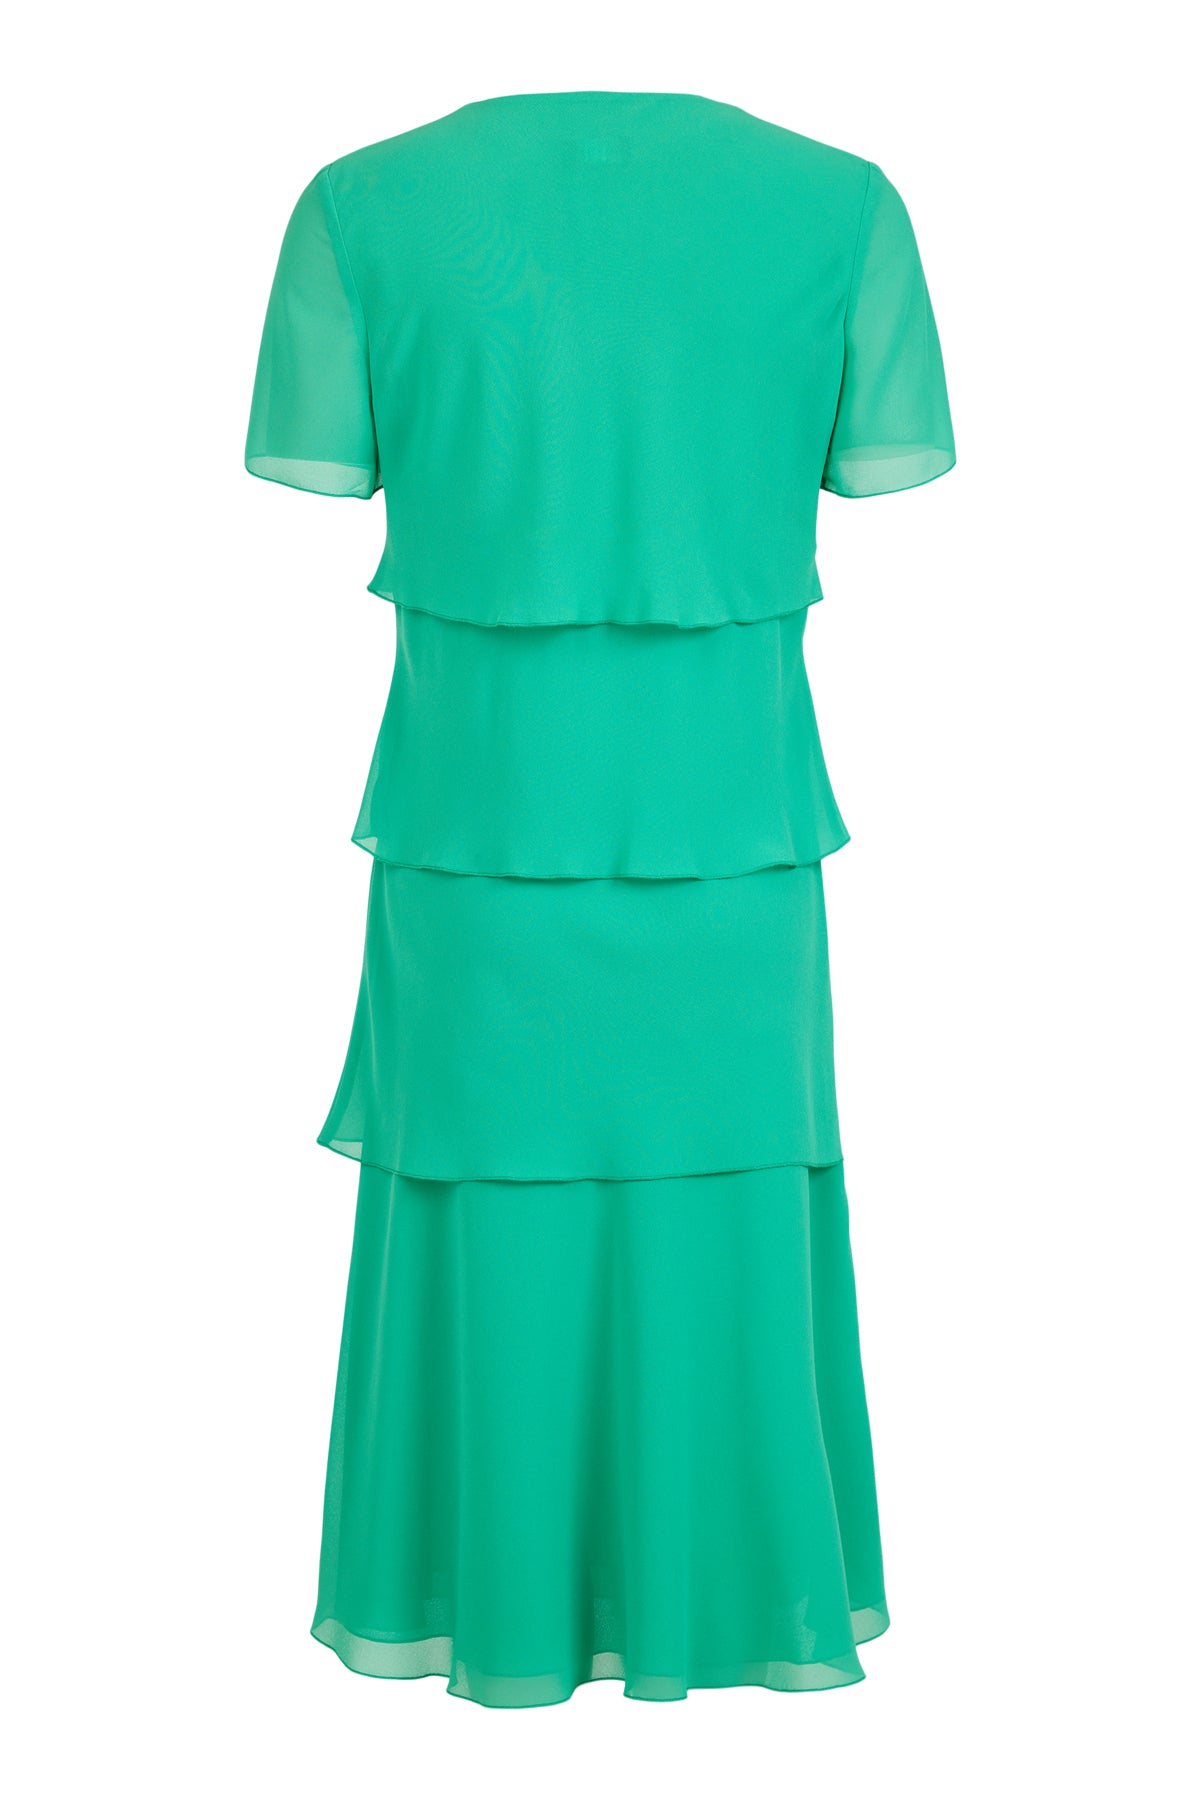 Green Round Neck Dress With Frill Effect & Short Sleeves